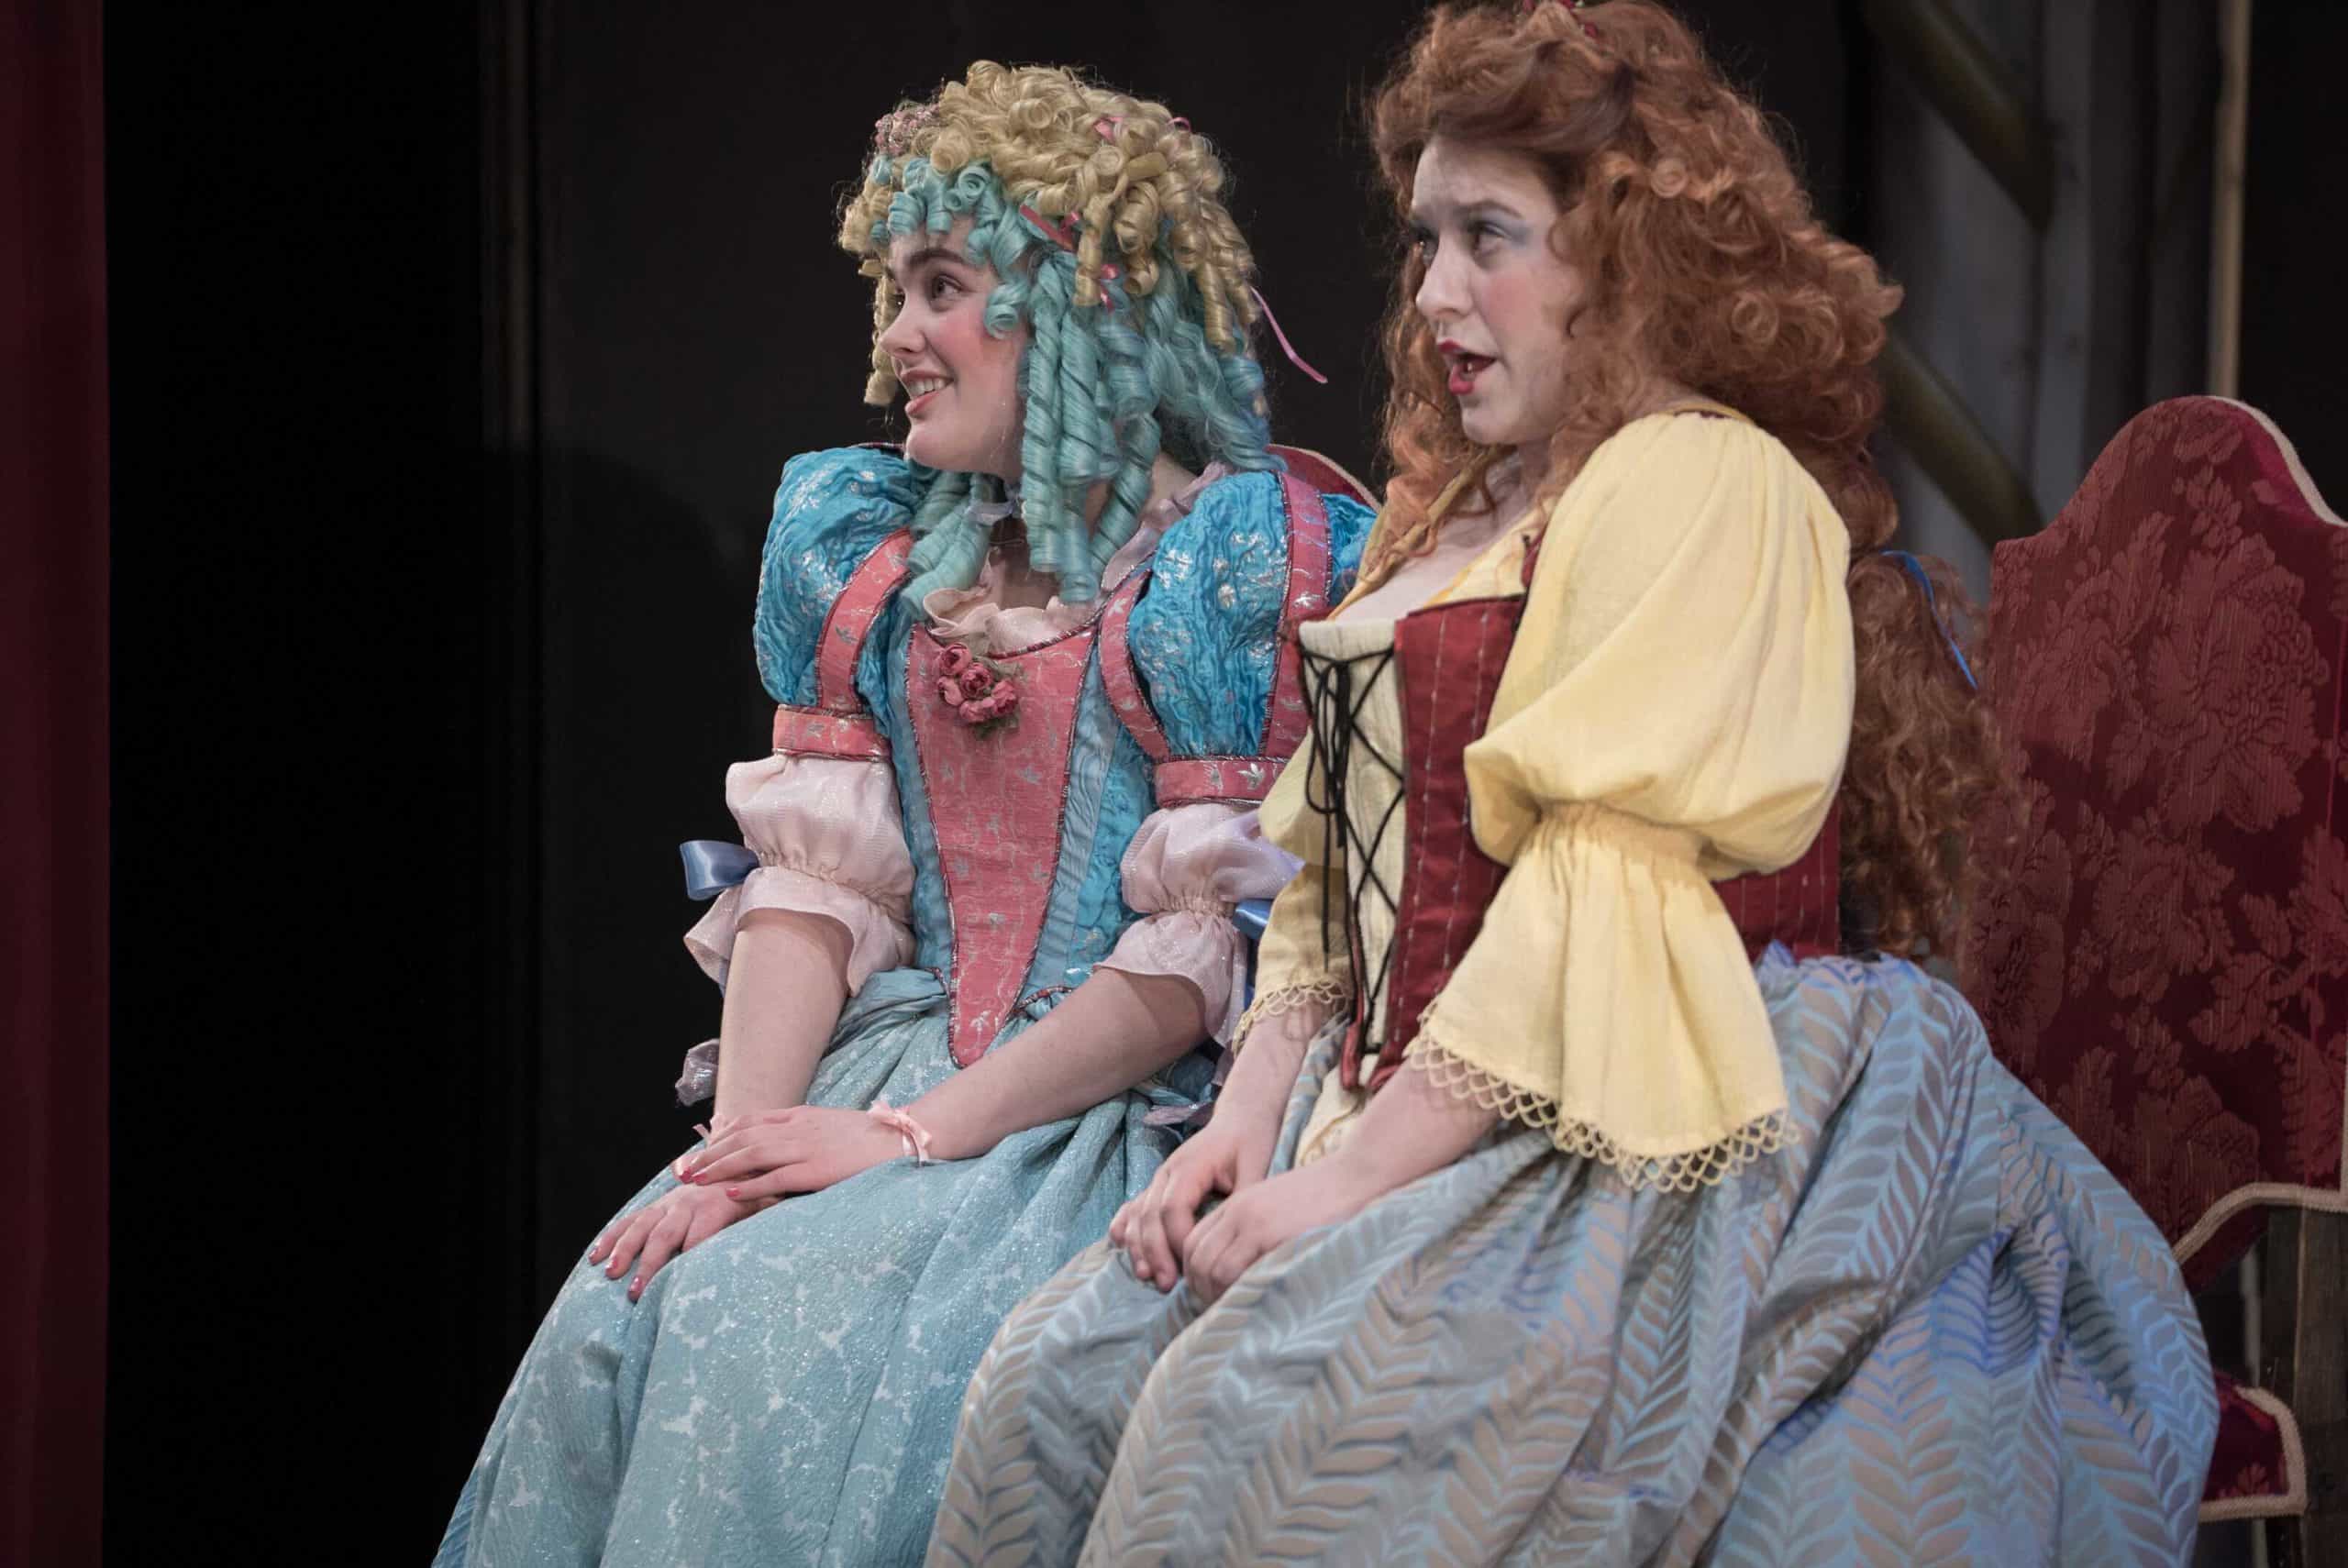 Nicole Jones as Mariane and Evelyn Mahon as Dorine in Tartuffe at Williams college.